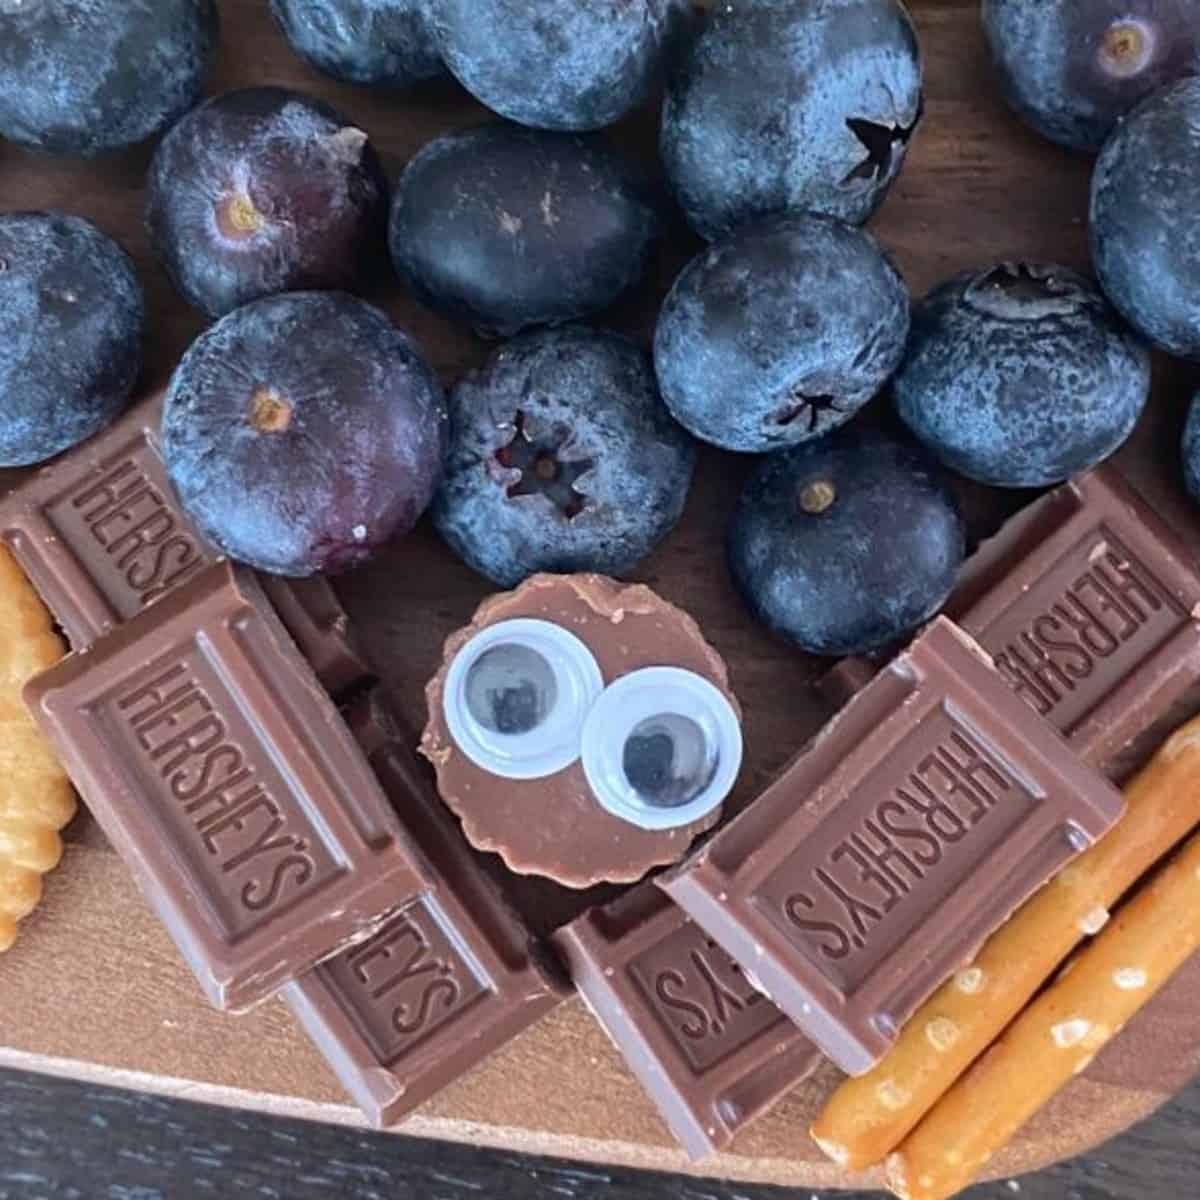 A photo of a Halloween bat made with Hershey's chocolate bars and a Reese's peanut butter cup in the center. The eyes are made with plastic googly eyes. The bat is arranged on a Halloween dessert board.